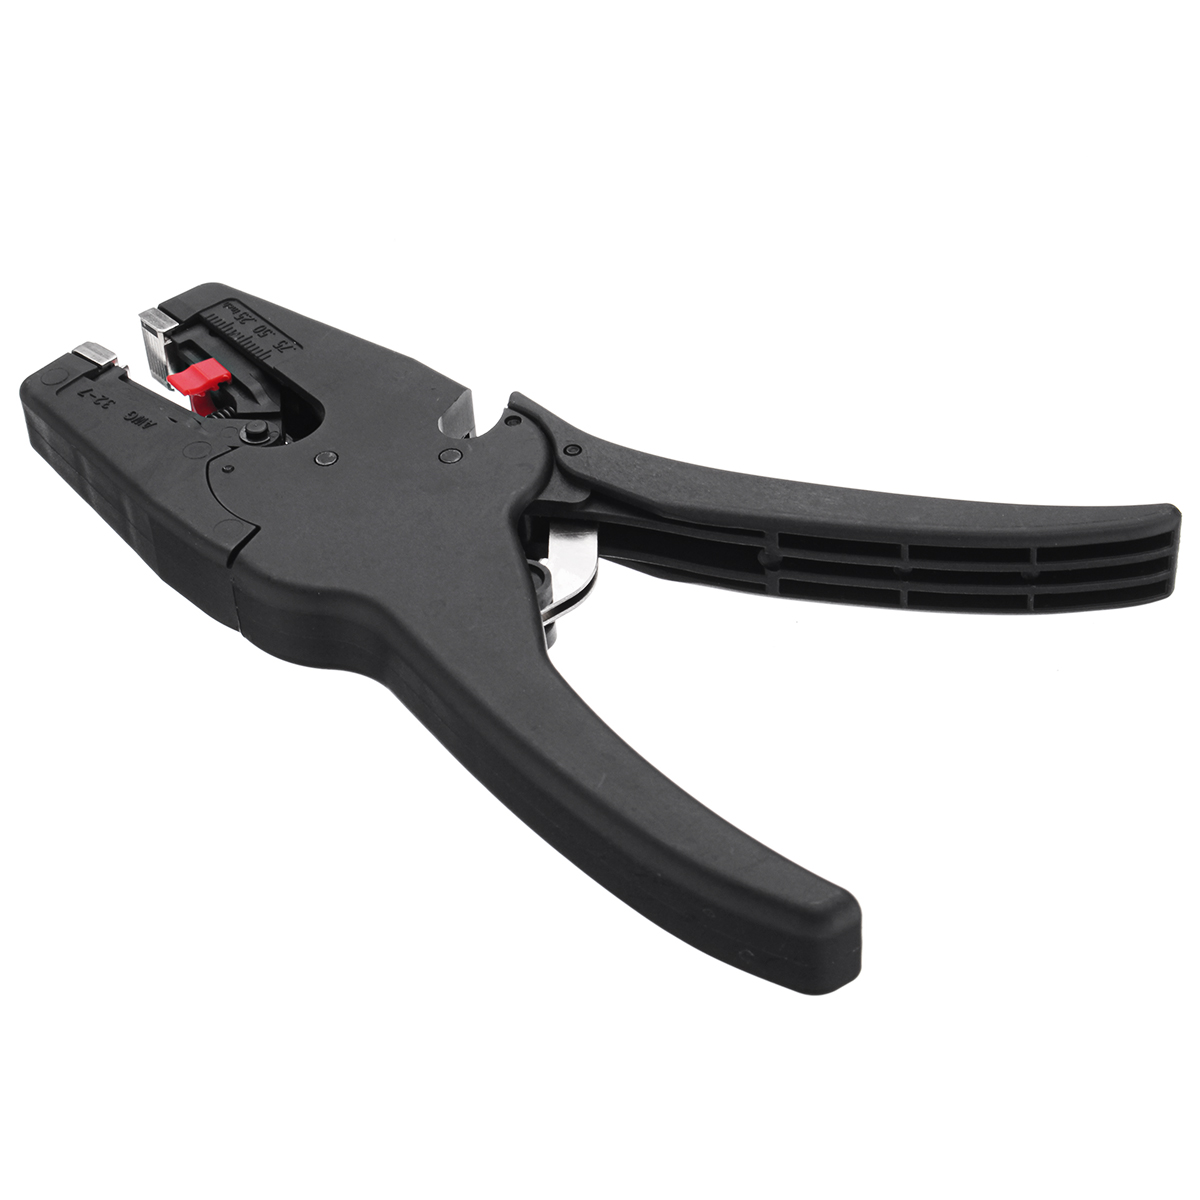 Multifunctional-Adjustable-Electric-Cable-Wire-Crimper-Stripper-Stripping-Plier-003-10mmsup2-1315989-5